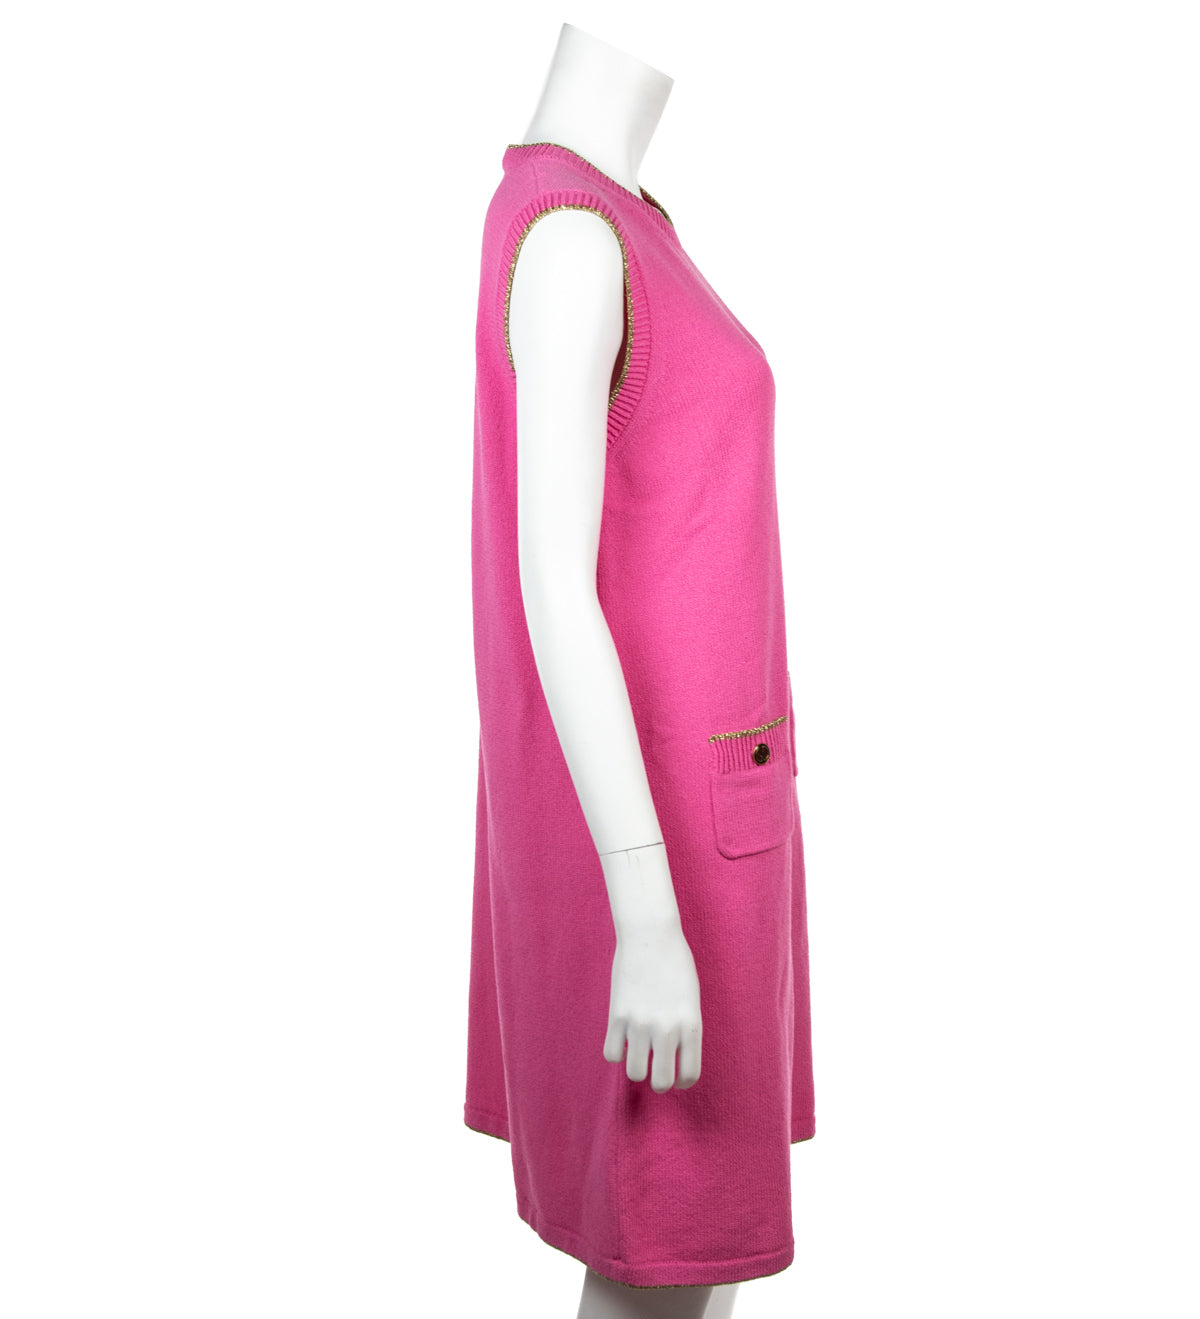 Gucci Pink Cotton Knit Sleeveless Dress Size XL - Love that Bag etc - Preowned Authentic Designer Handbags & Preloved Fashions